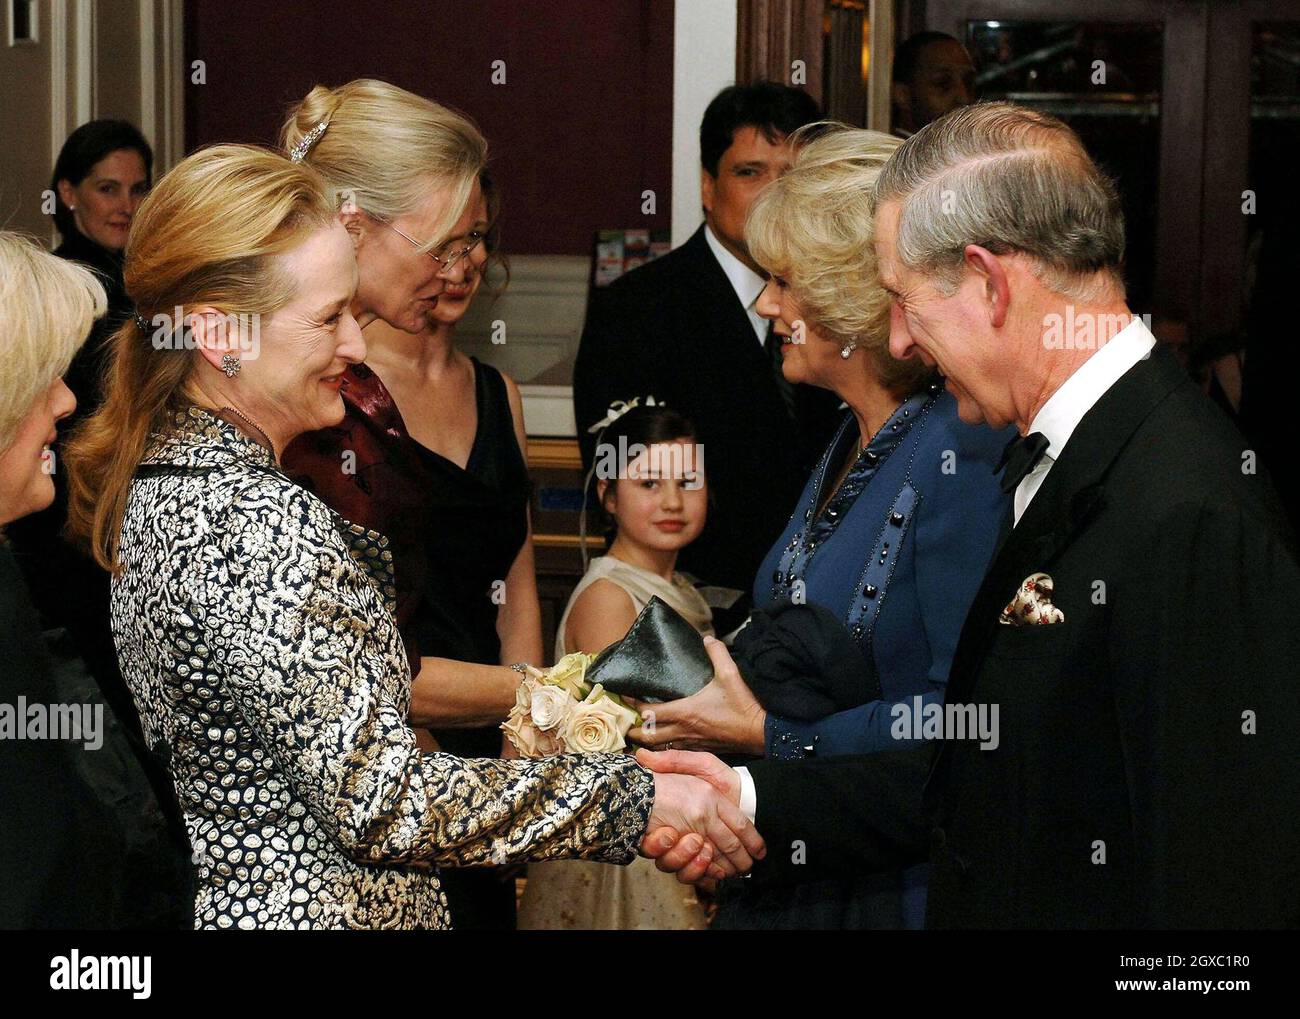 Prince Charles, Prince of Wales shakes hands with actress Meryl Streep at the Harvard Club where the Prince will receive the Global Environmental Citizen Award from Harvard medical School's Center for Health and the Global Environment on January 28, 2007 in New York. Anwar Hussein/EMPICS Entertainment  Stock Photo